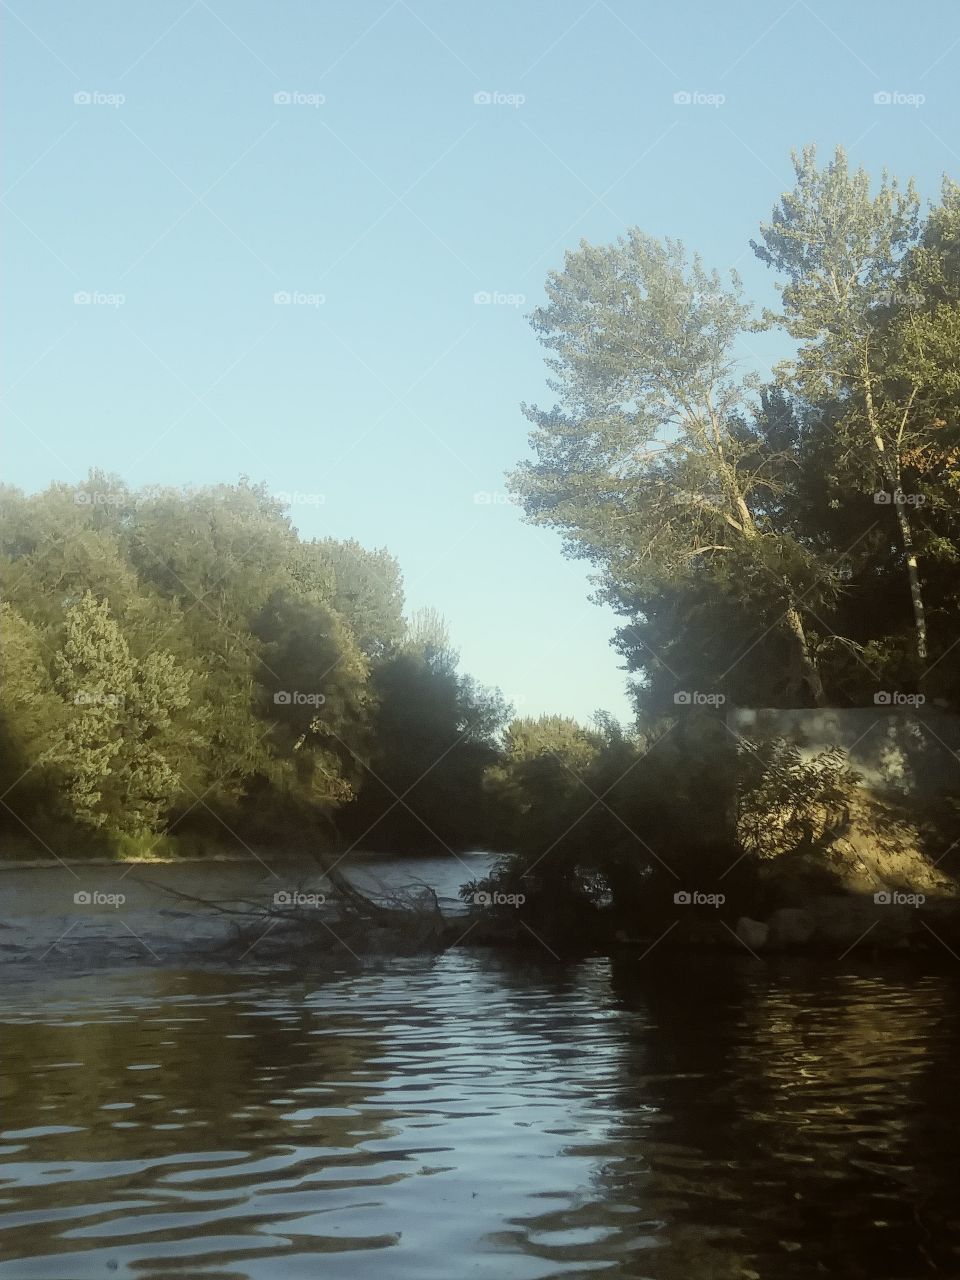 fork in the river